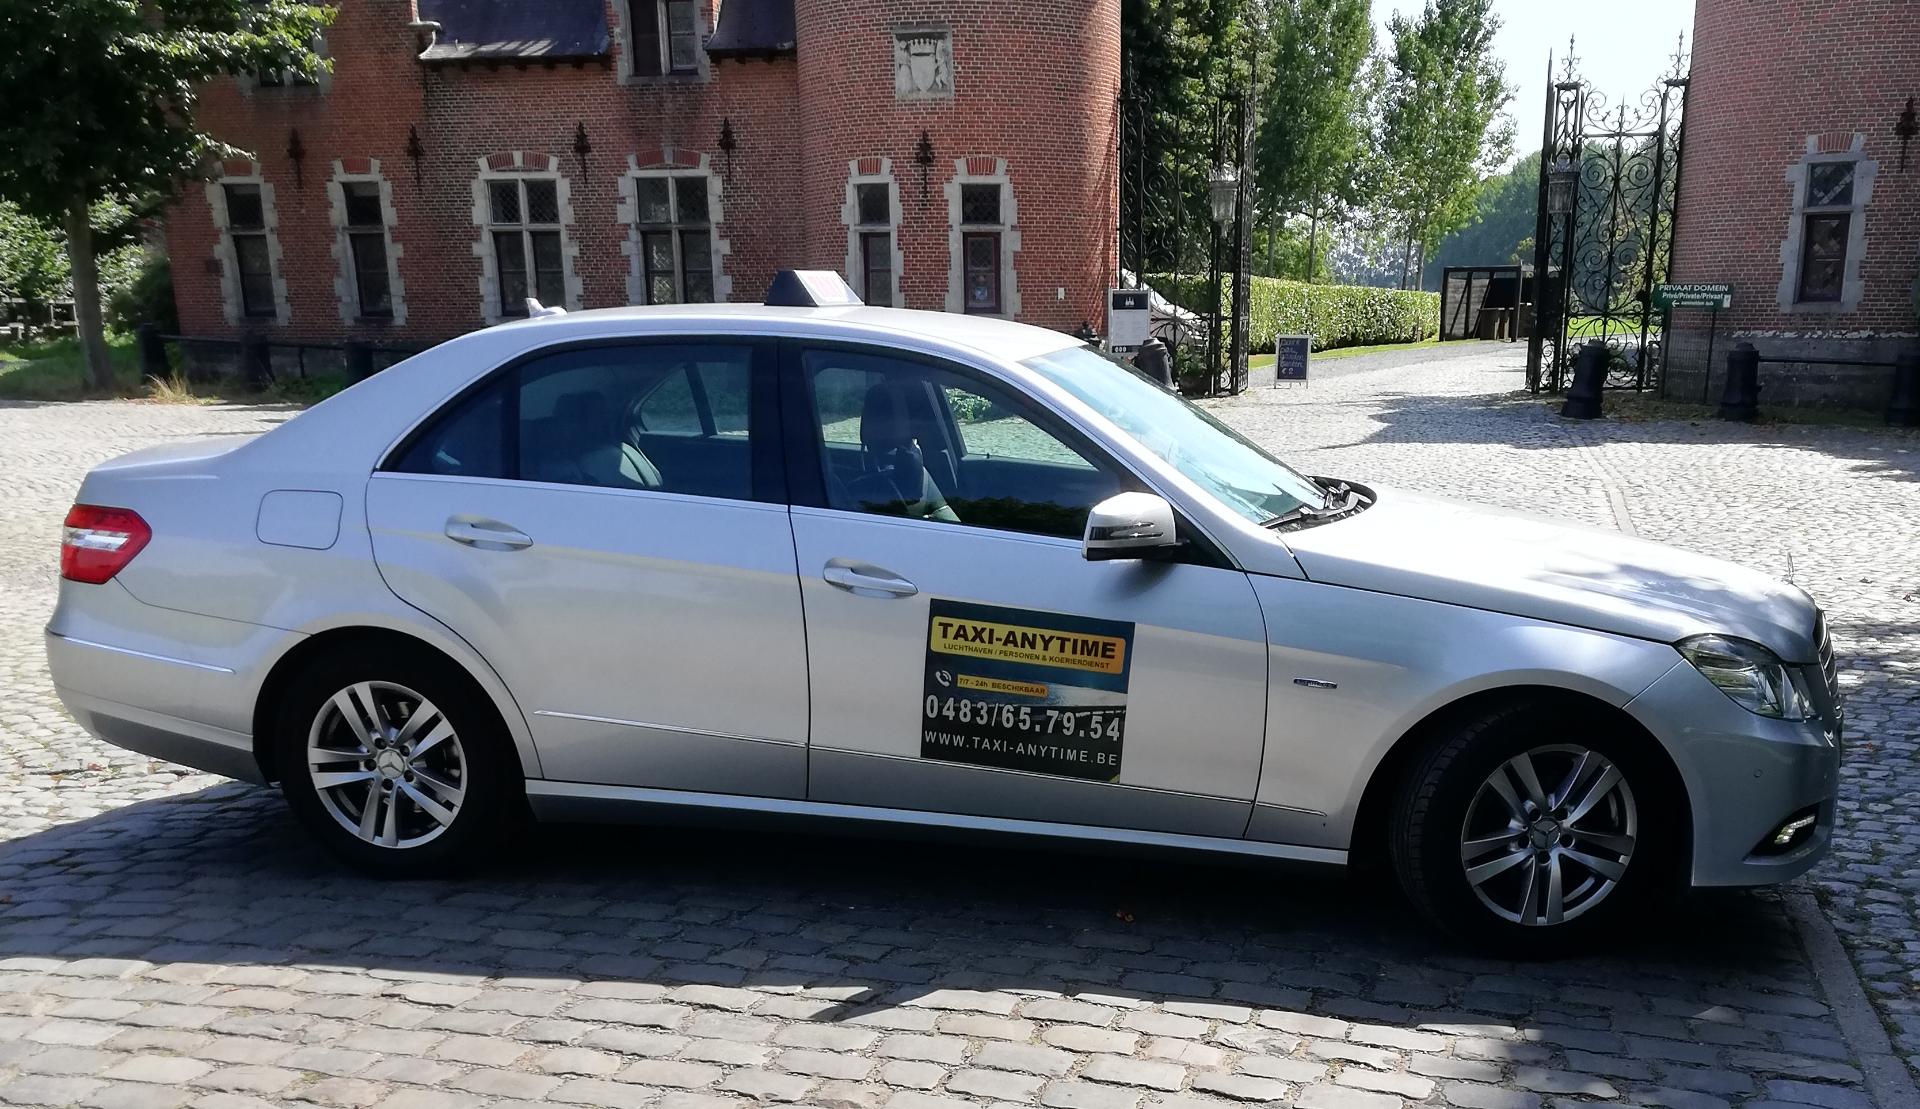 autoverhuur Zandhoven Taxi Anytime